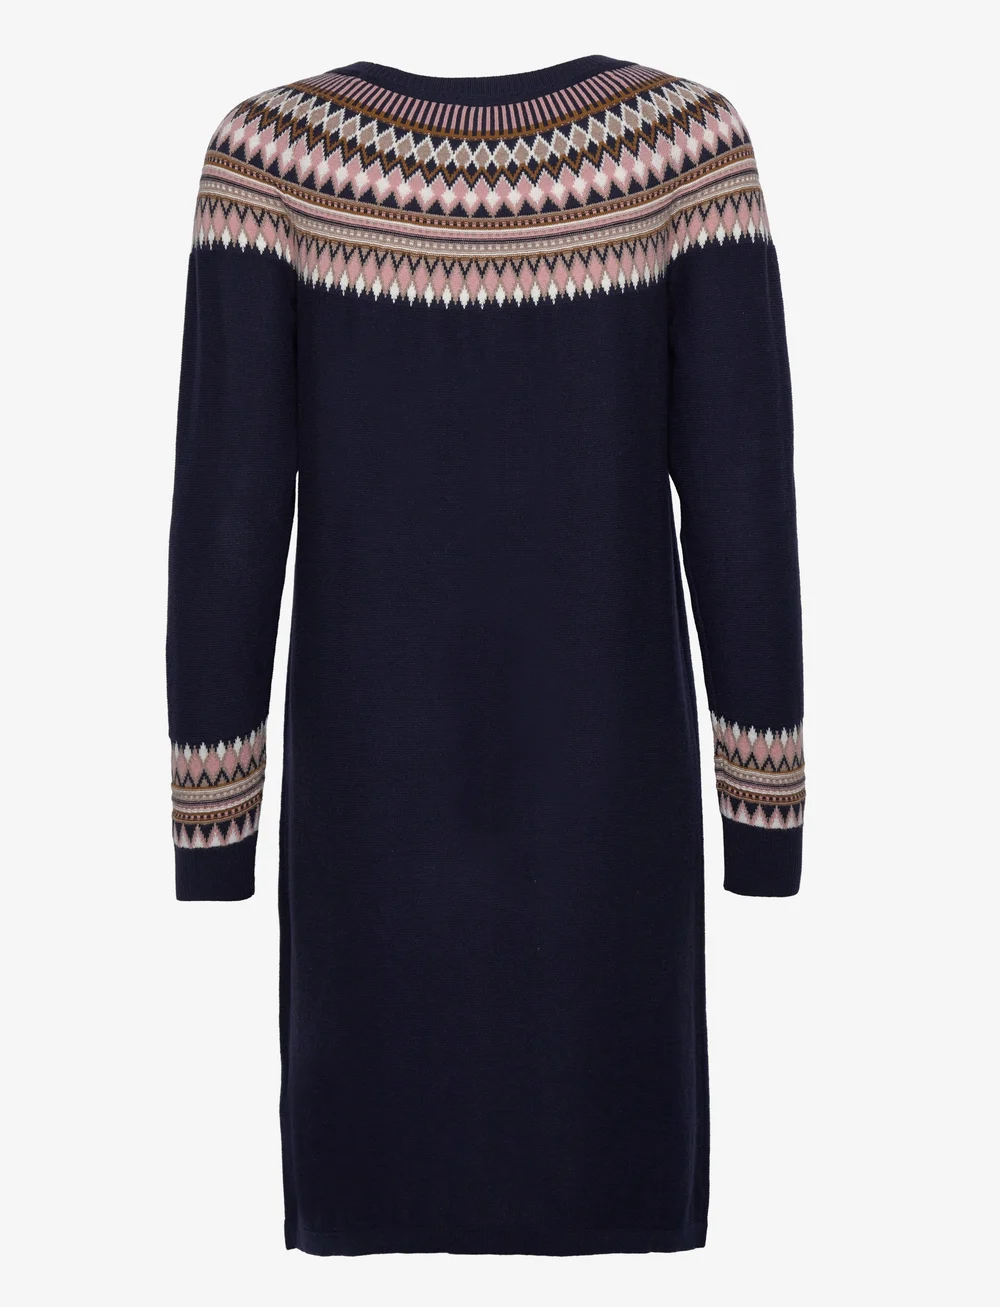 Esprit Casual Dresses Flat Knitted – dresses – shop at Booztlet